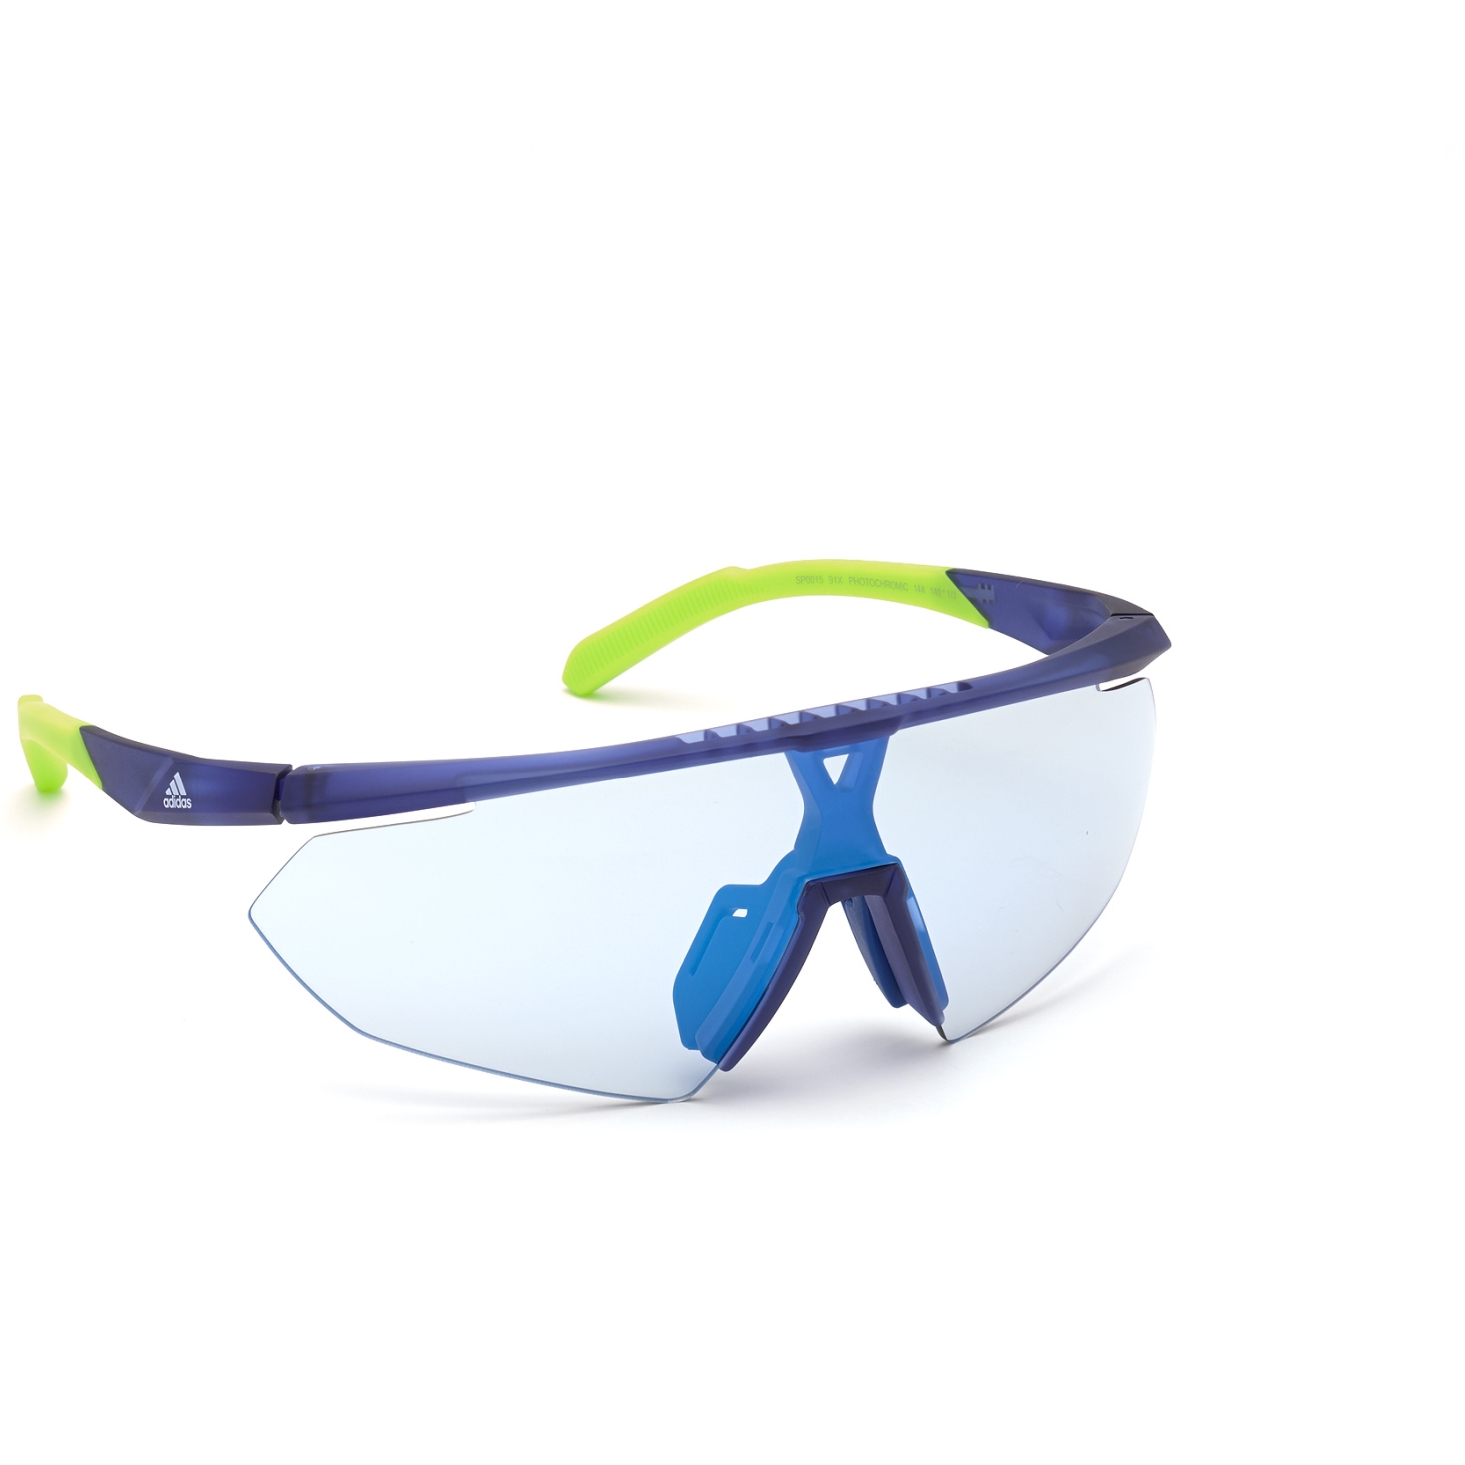 Image of adidas Sp0015 Injected Sports Sunglasses - Frosted Blue / Vario Mirror Blue